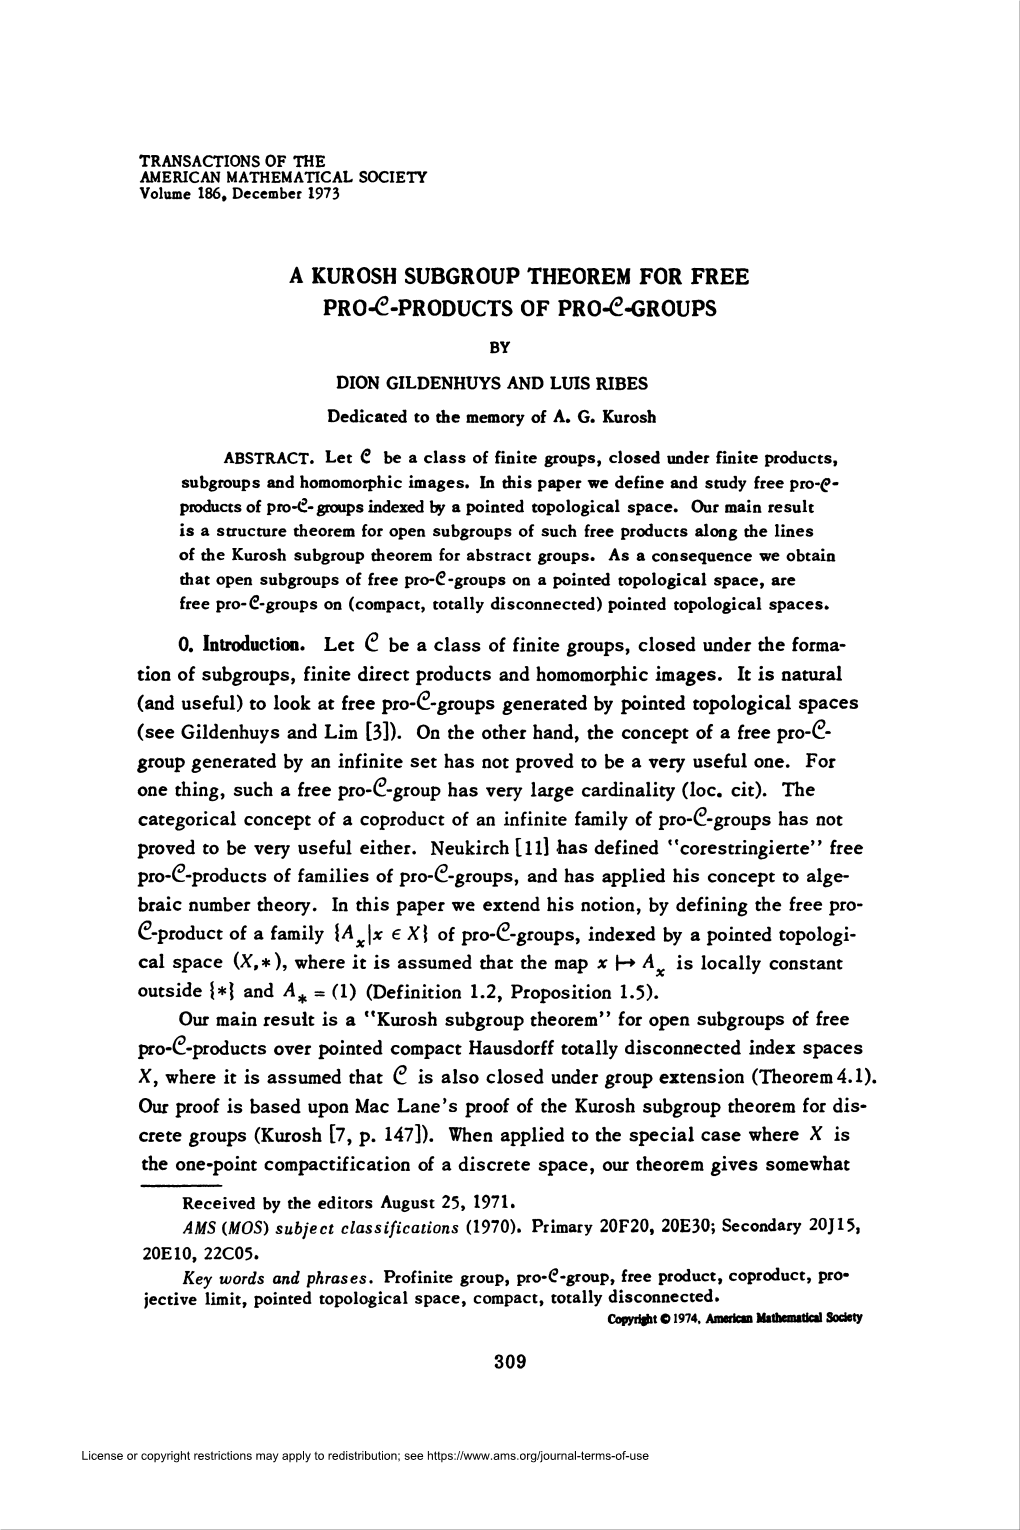 A Kurosh Subgroup Theorem for Free Pro-C-Products Of